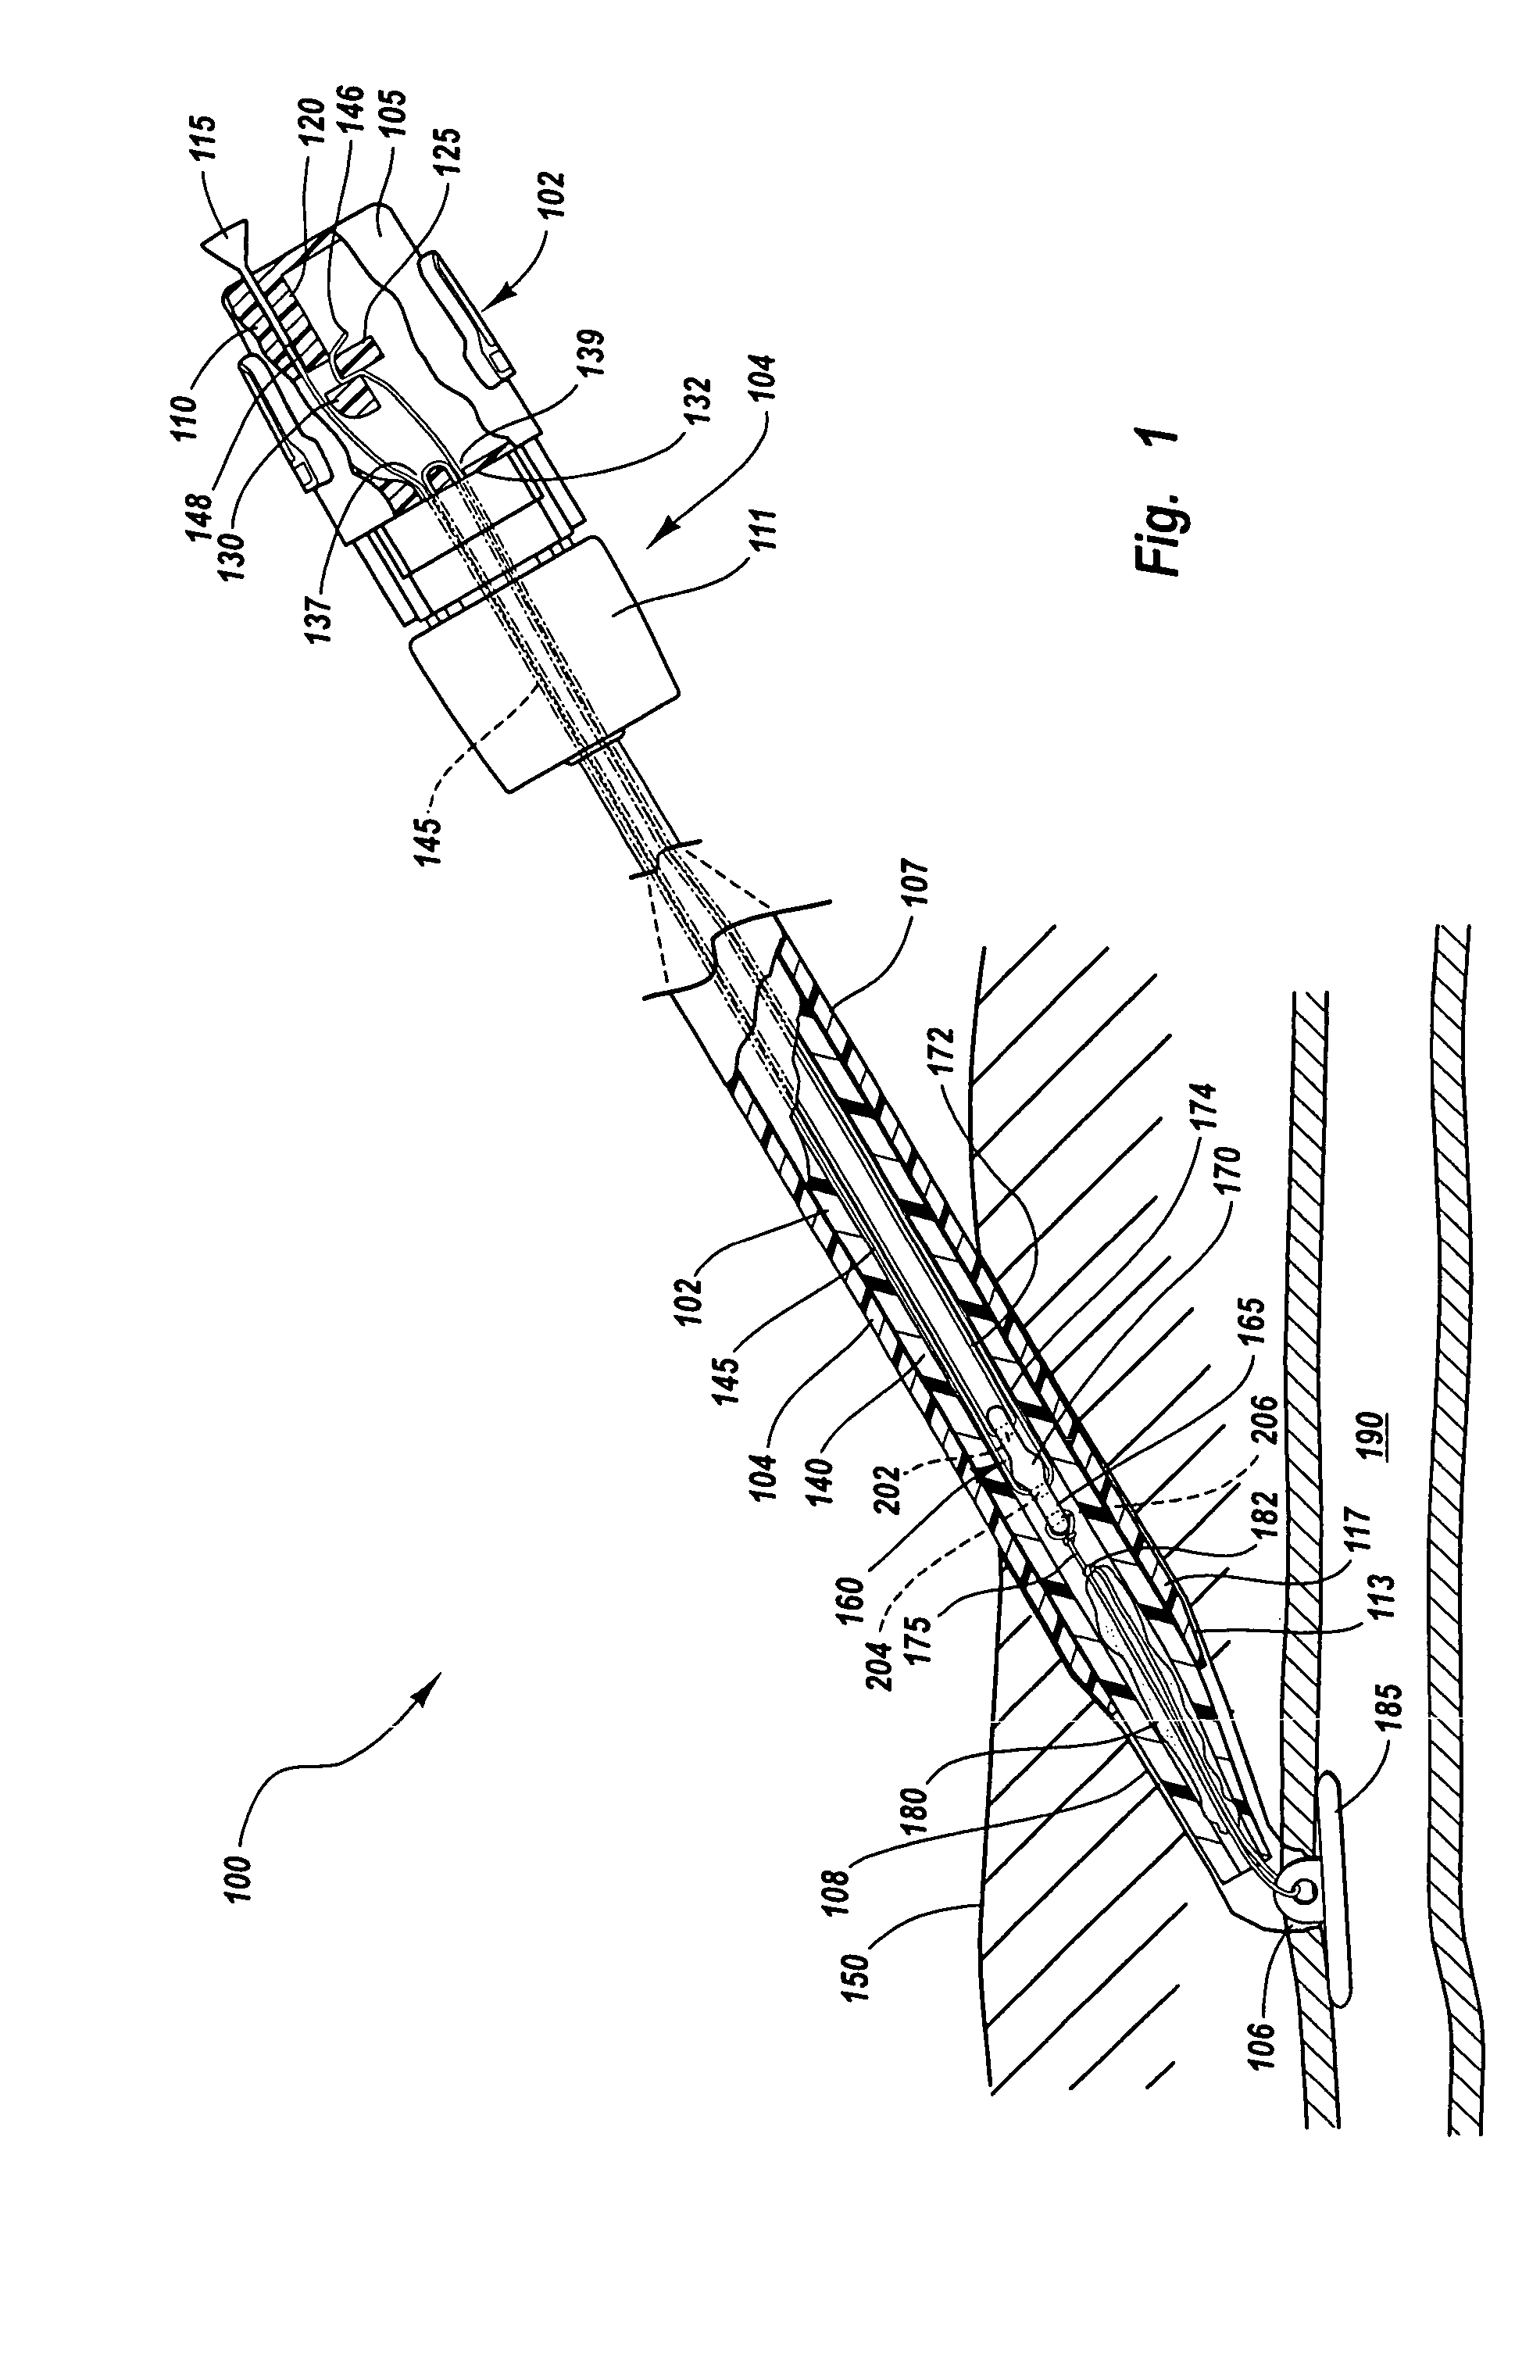 Method and apparatus for sealing an internal tissue puncture incorporating a block and tackle